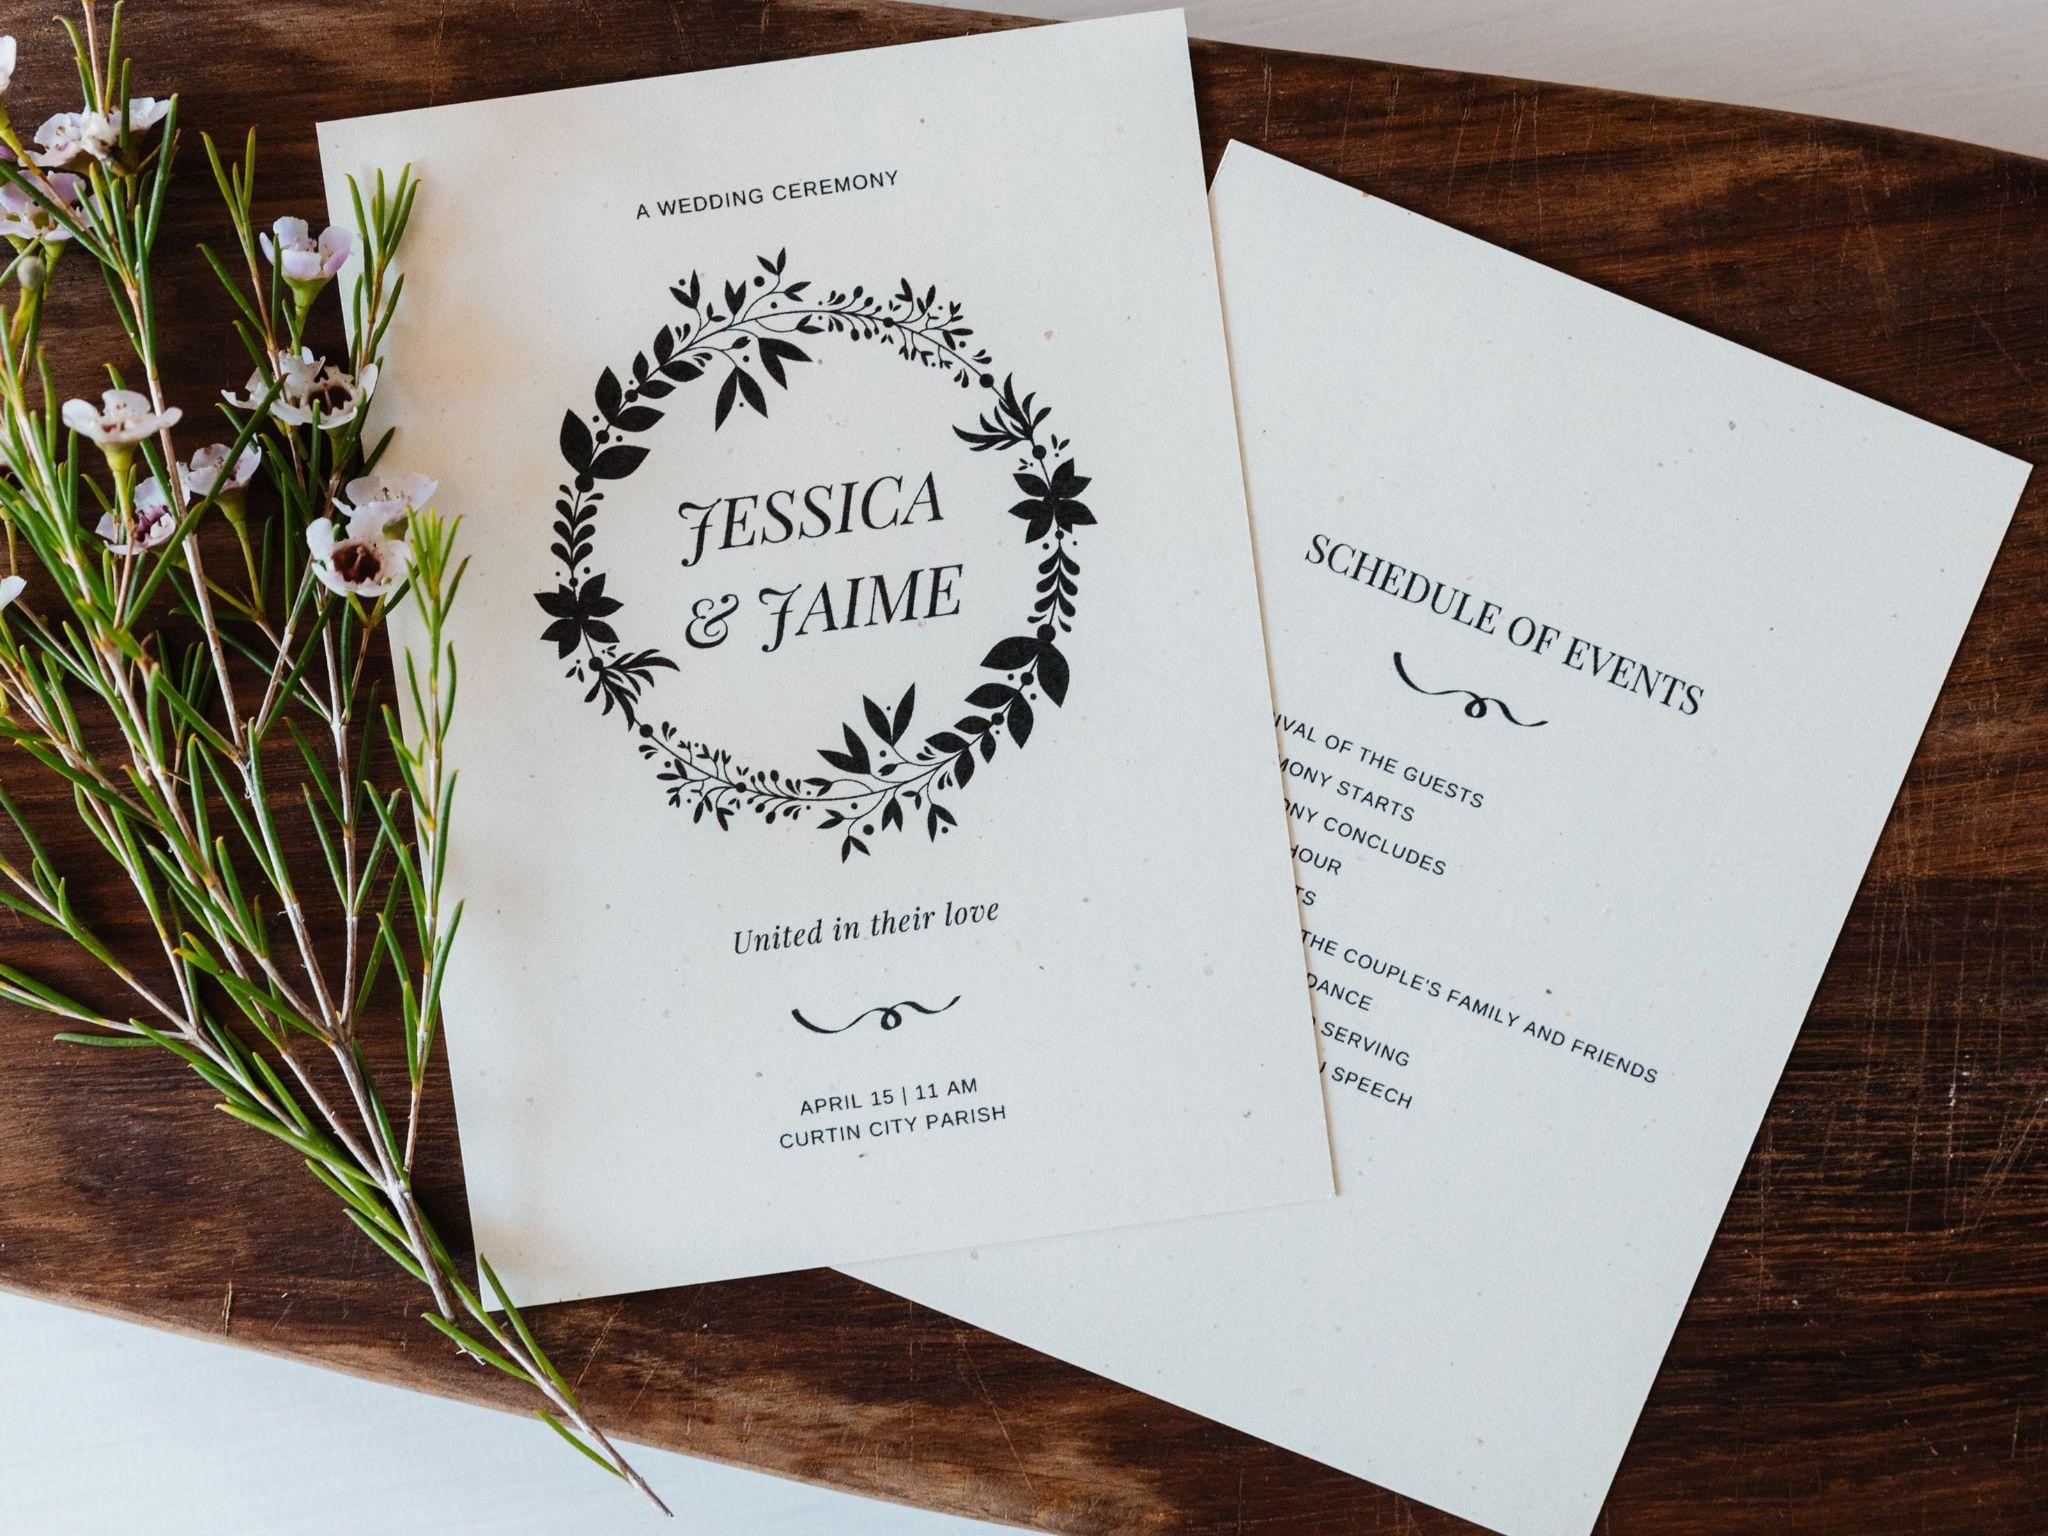 3 Reasons To Go With A Book fold Wedding Program Instead of Flat